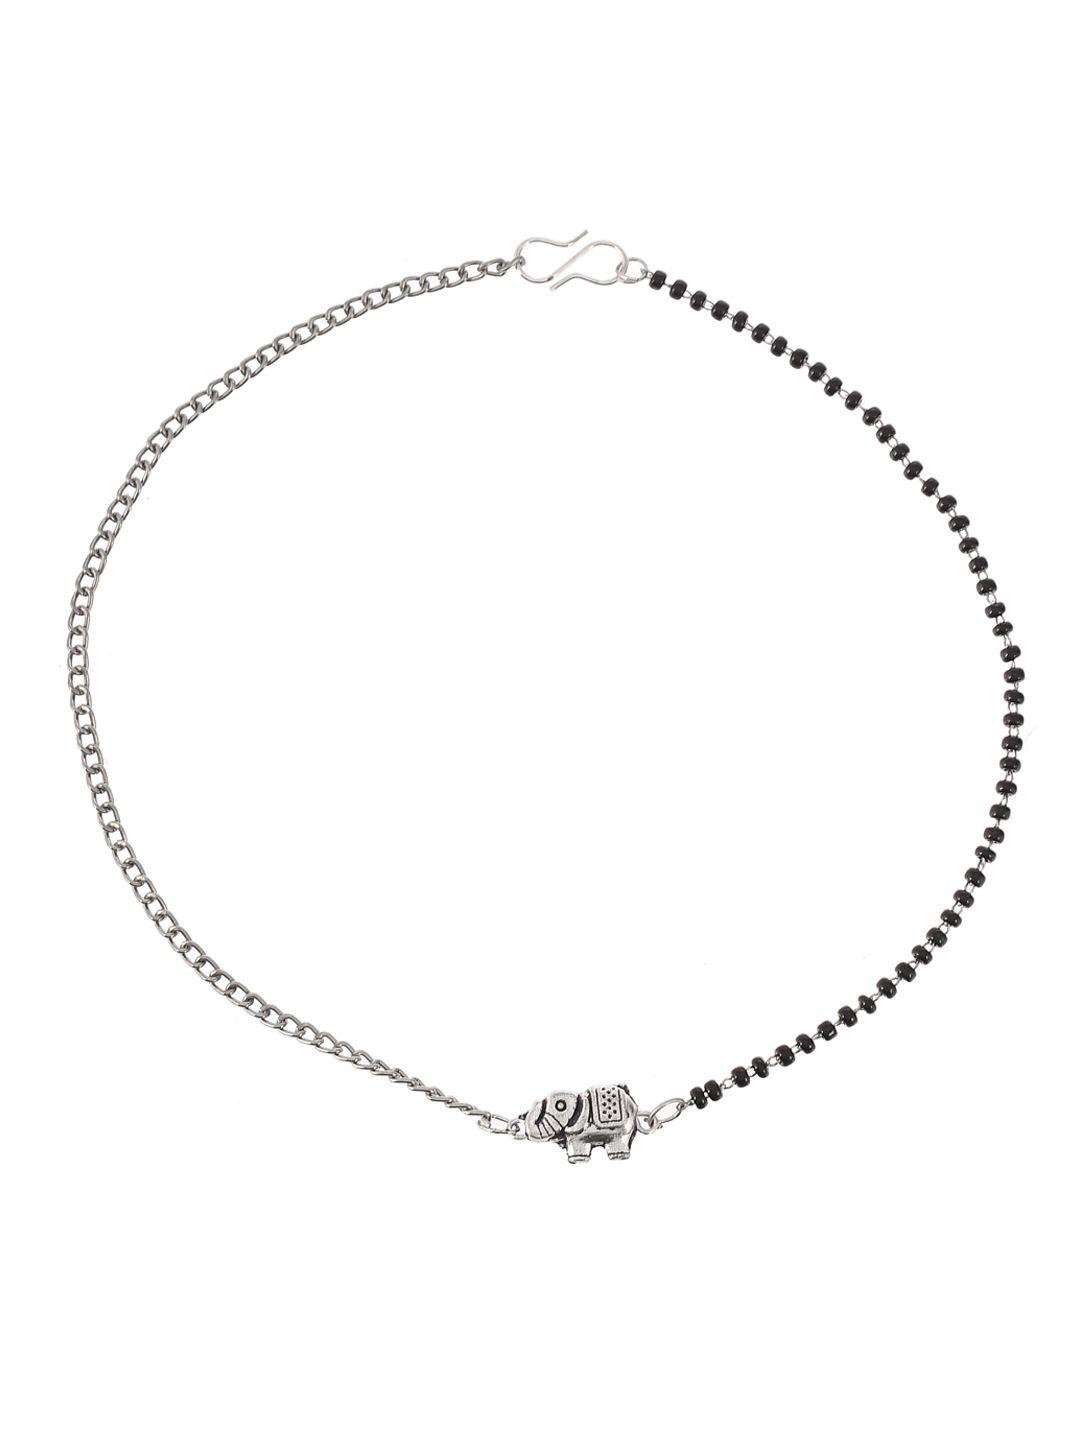 shoshaa silver-plated stone-studded & black beaded anklet